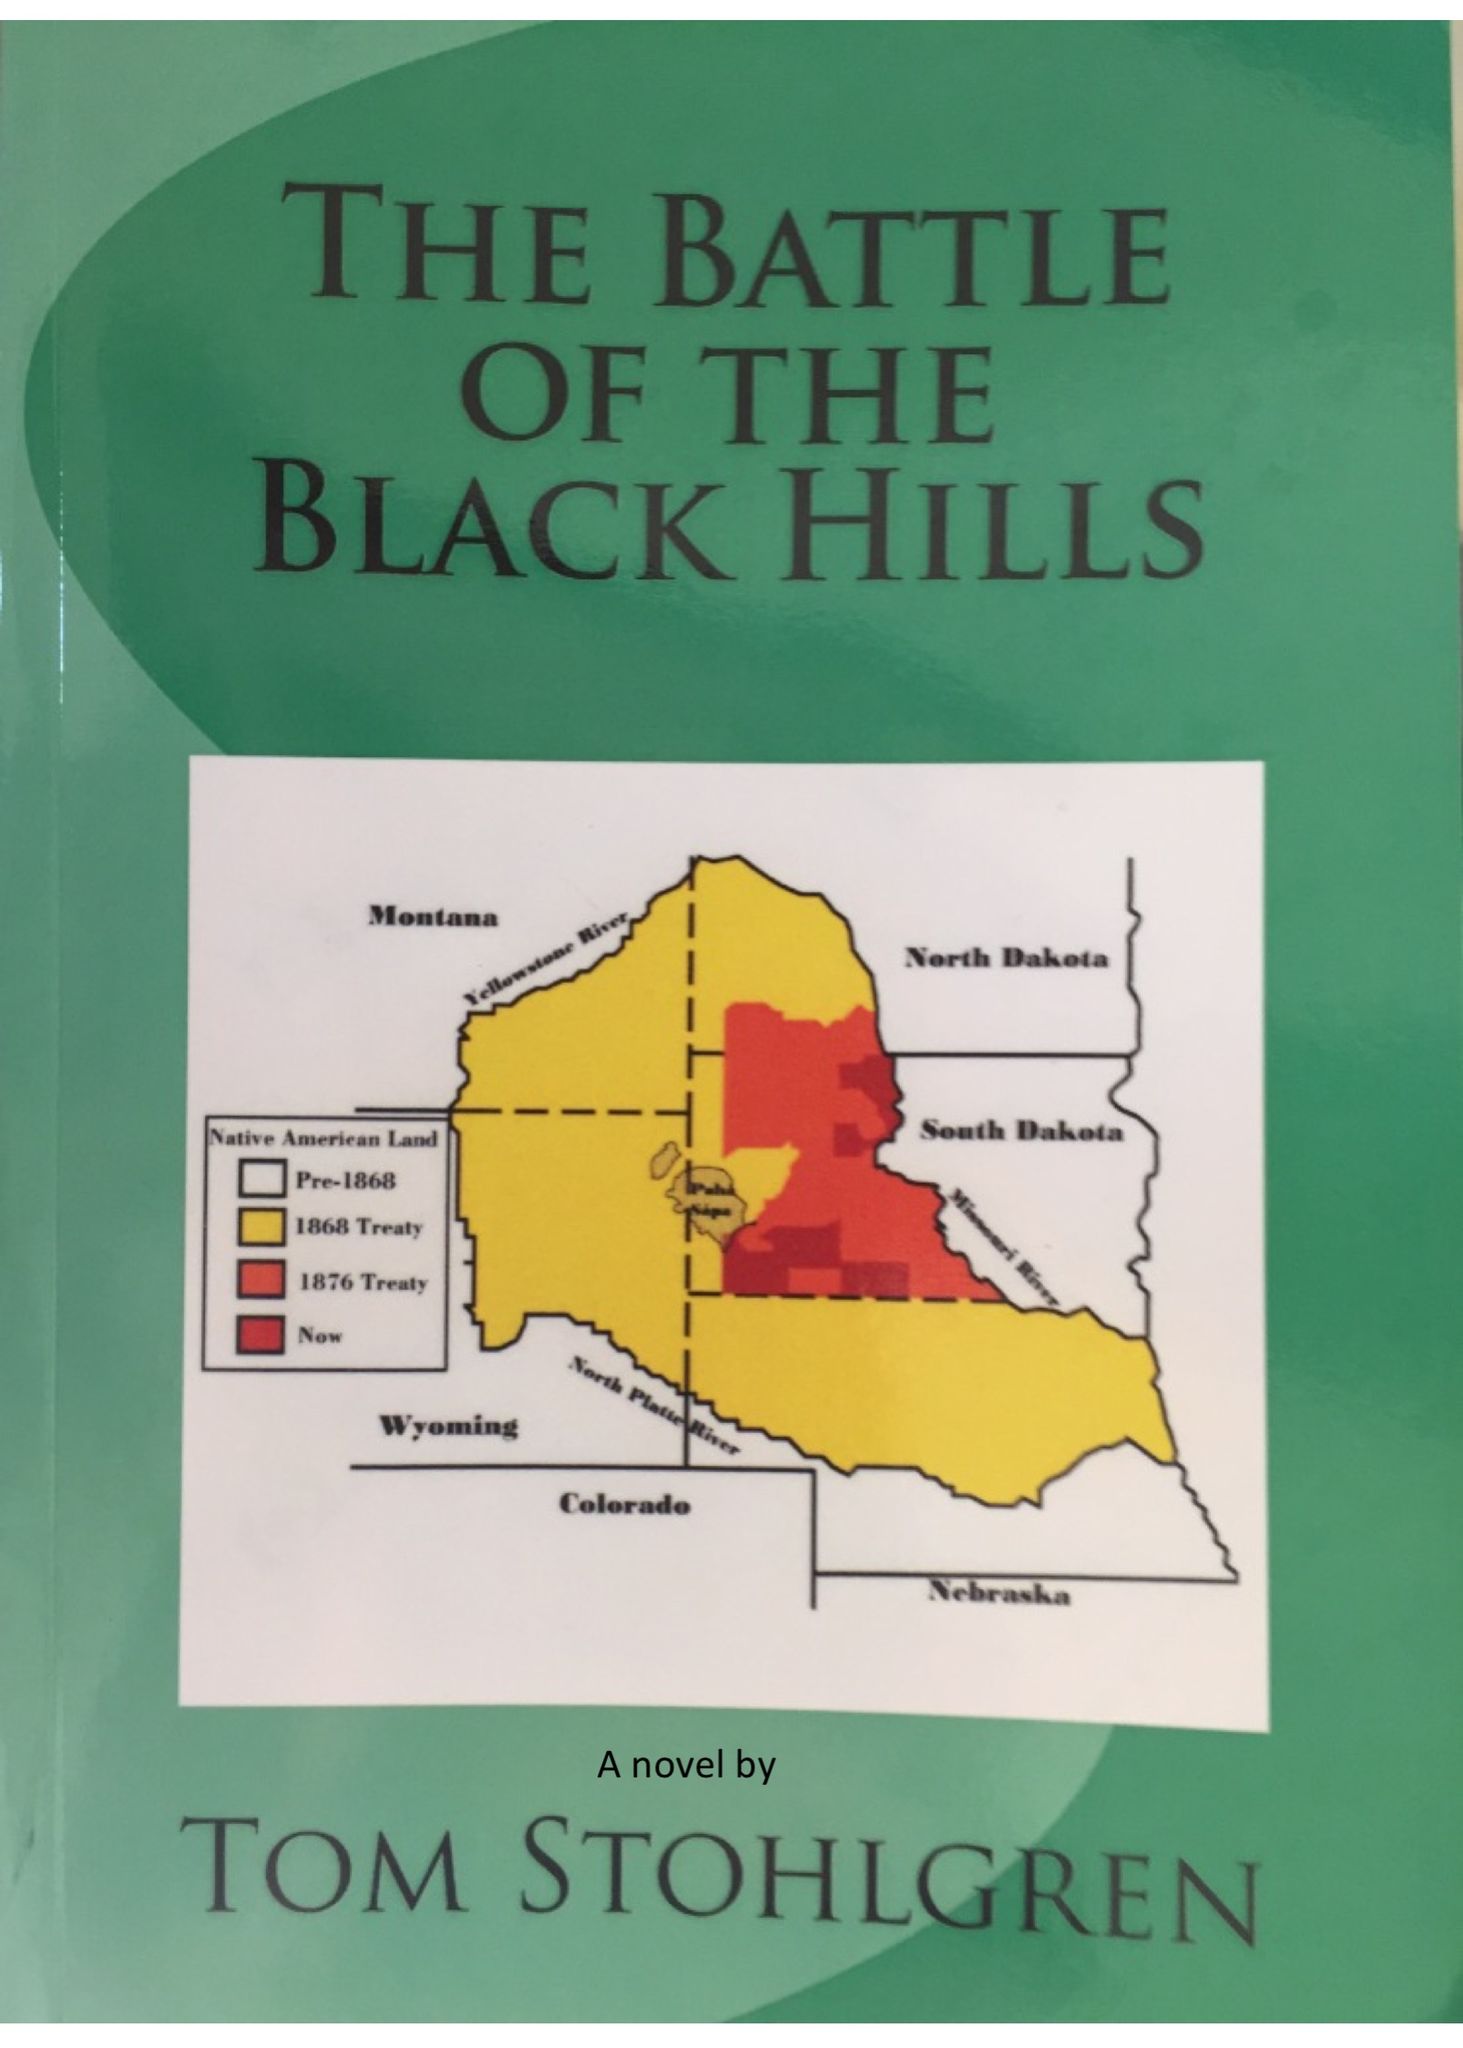 THE BATTLE FOR THE BLACK HILLS